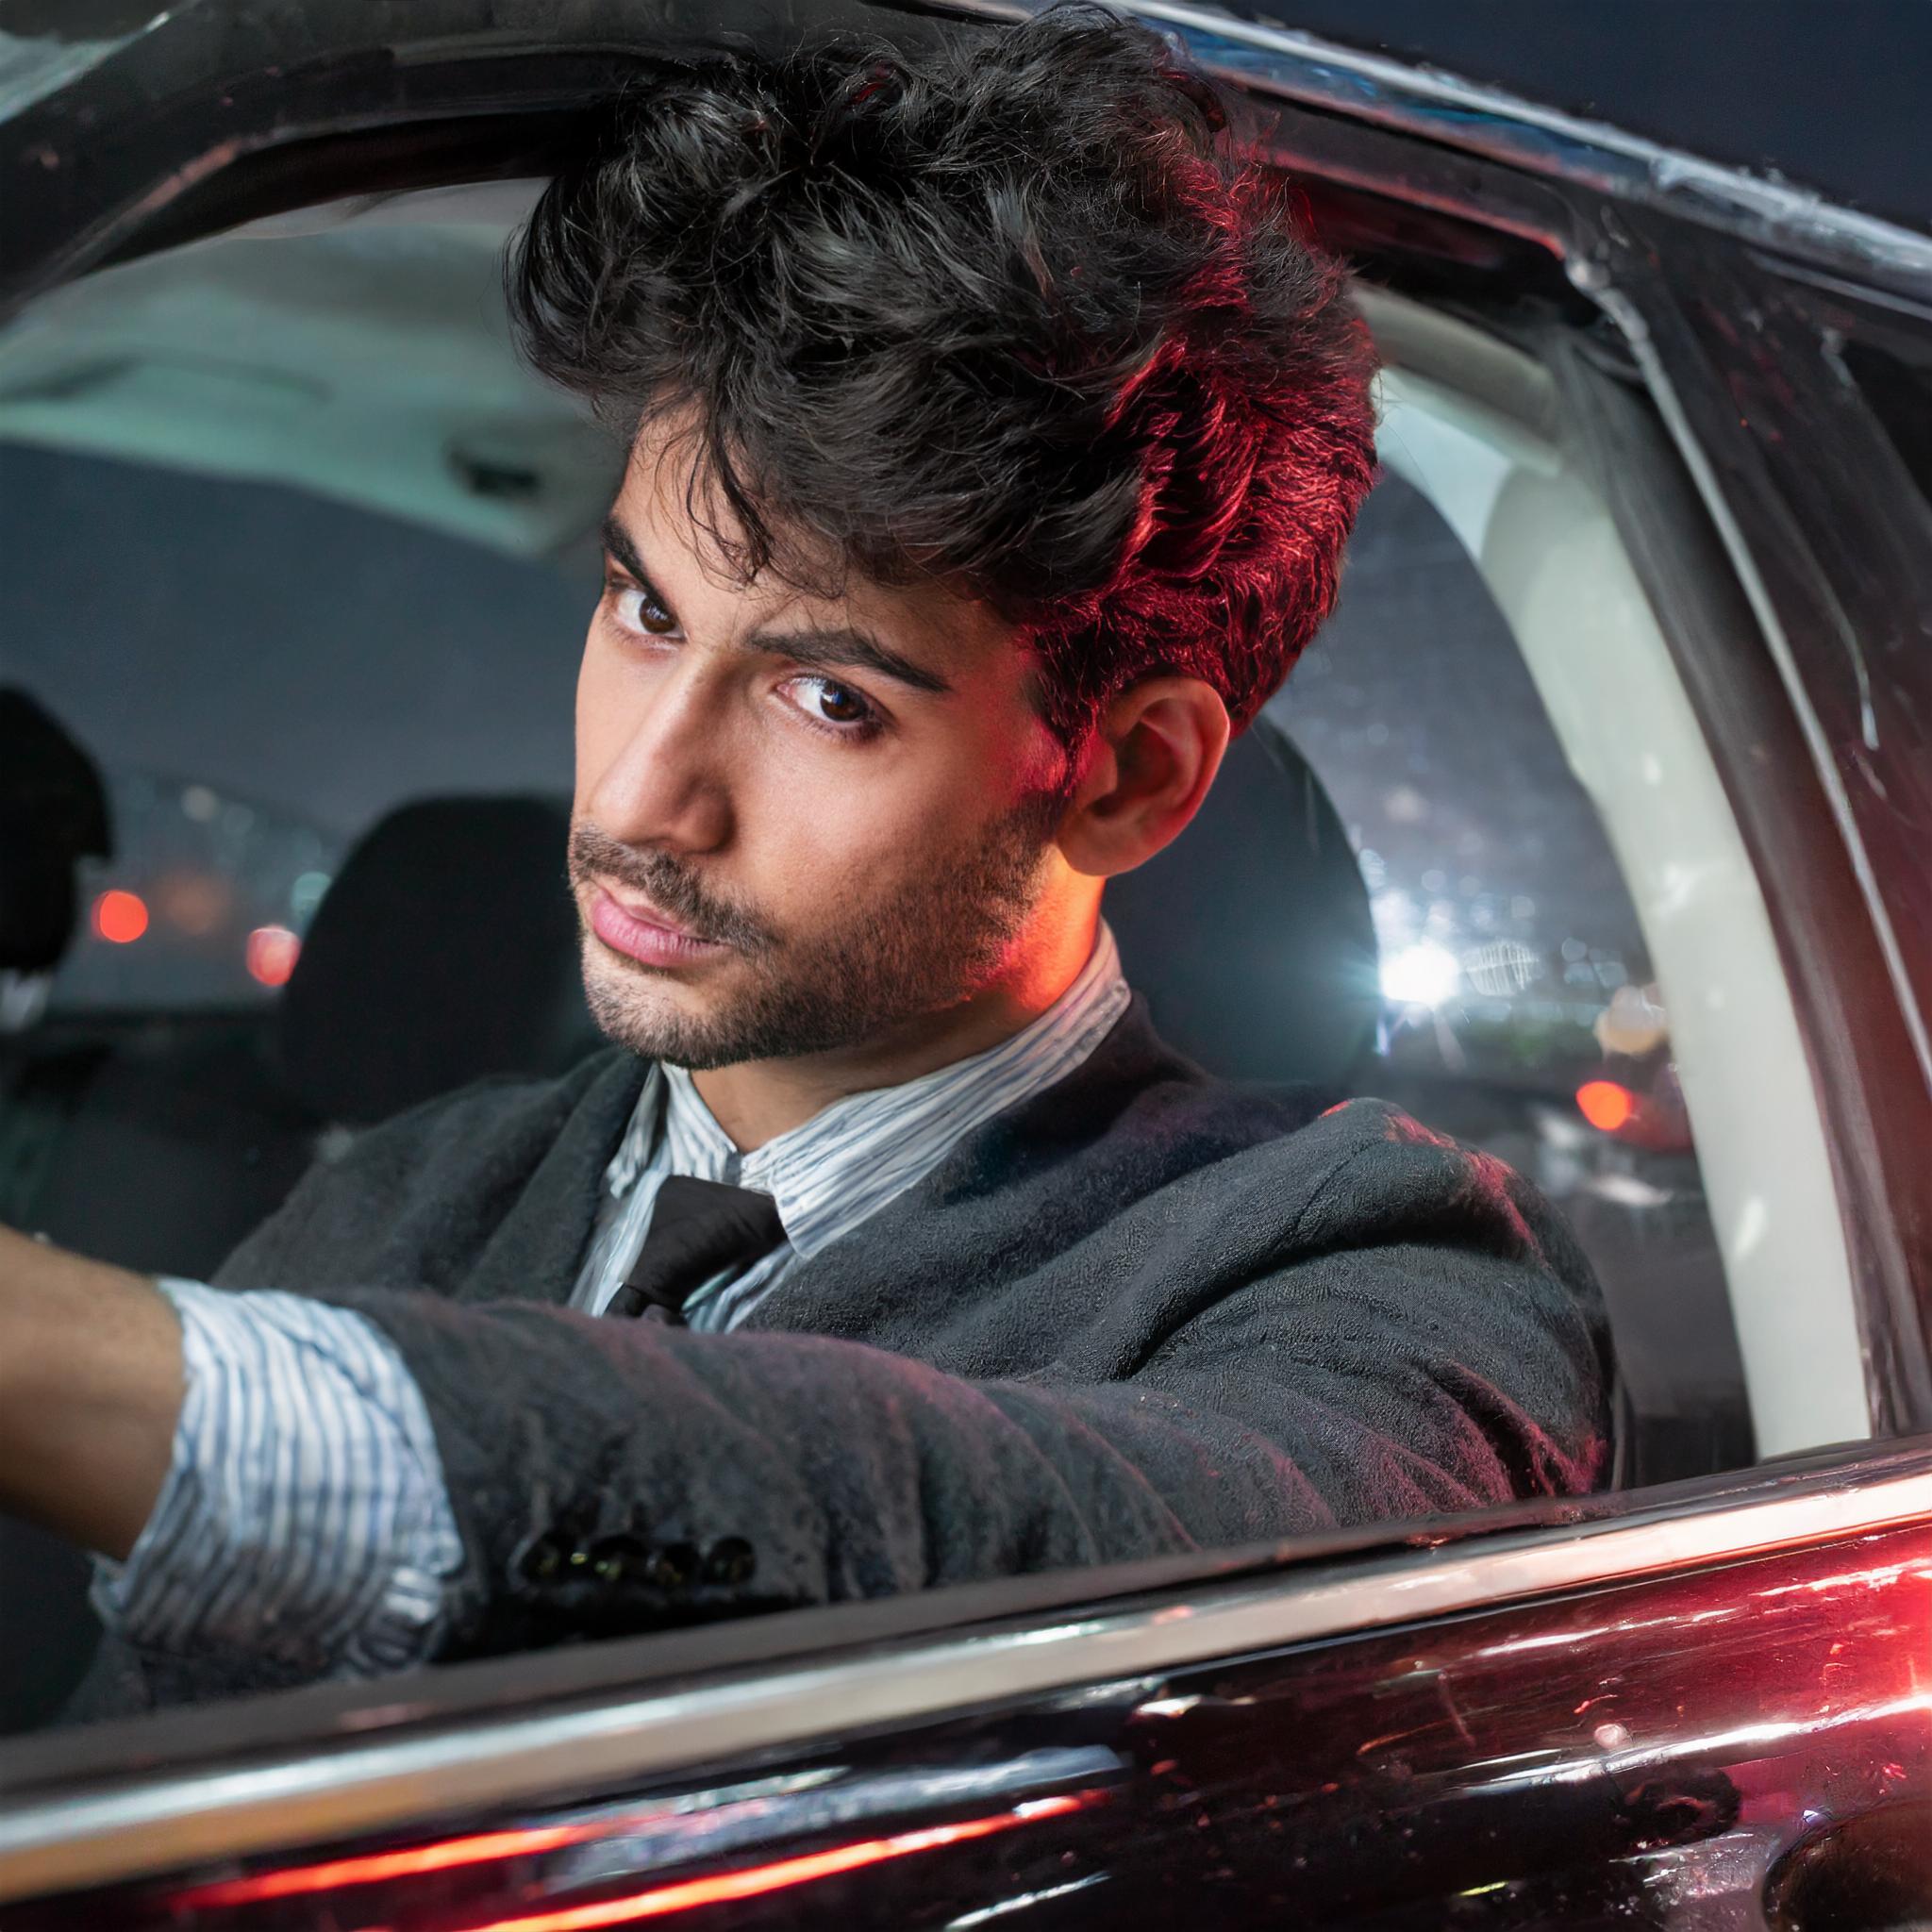 A young man behind the wheel in a business suit with disheveled hair after being pulled over - police lights reflecting off his car